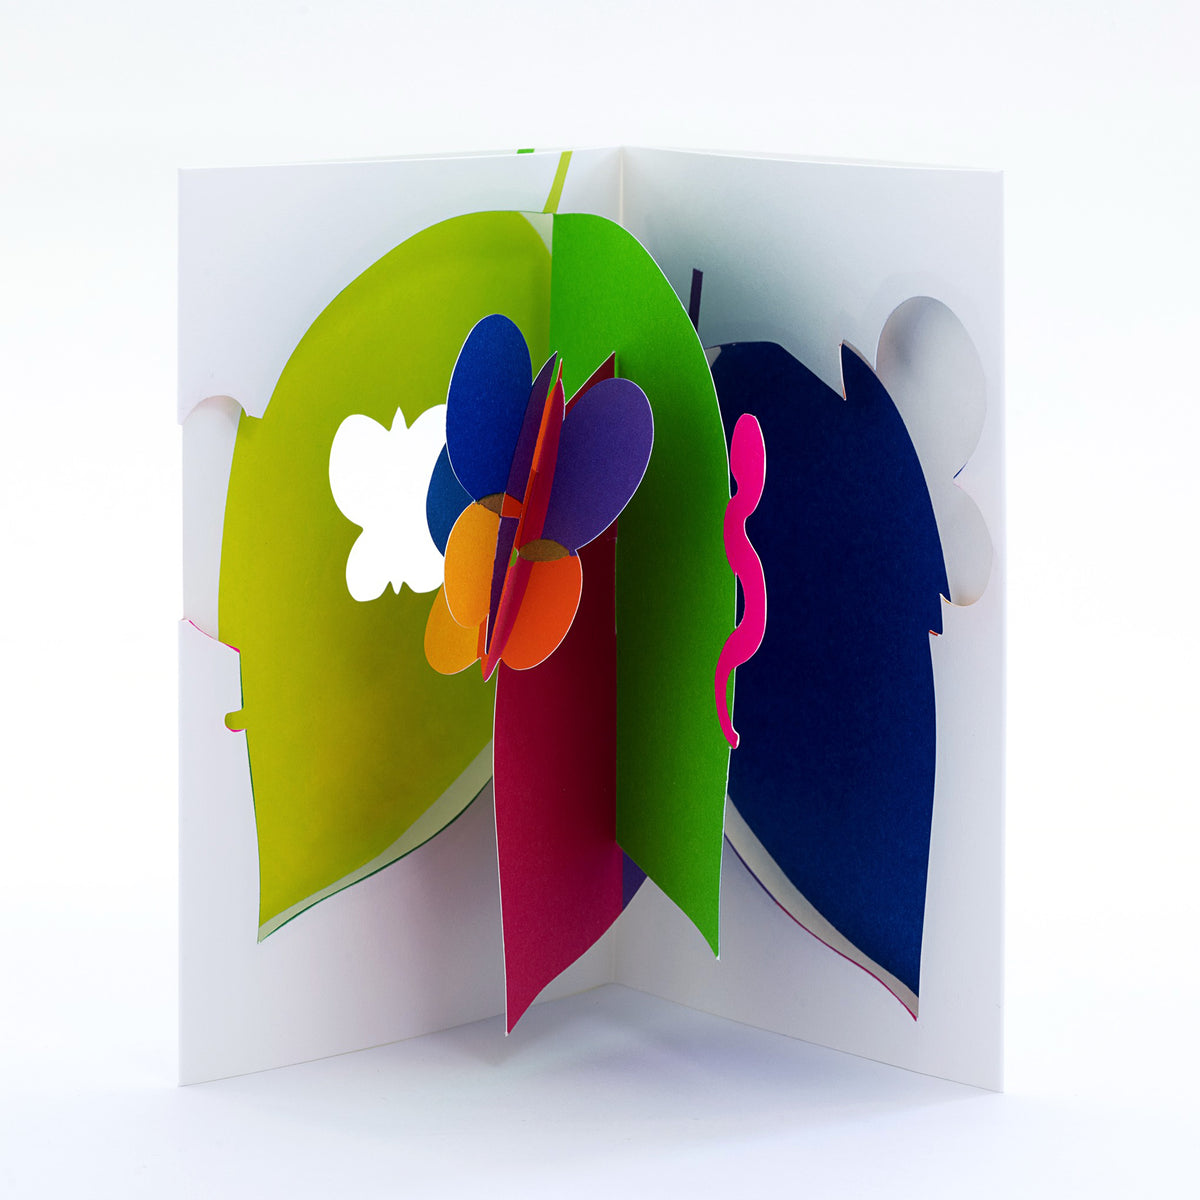 Official US Distributor of IC Design - Butterflies Pop Up Card - AMEICO